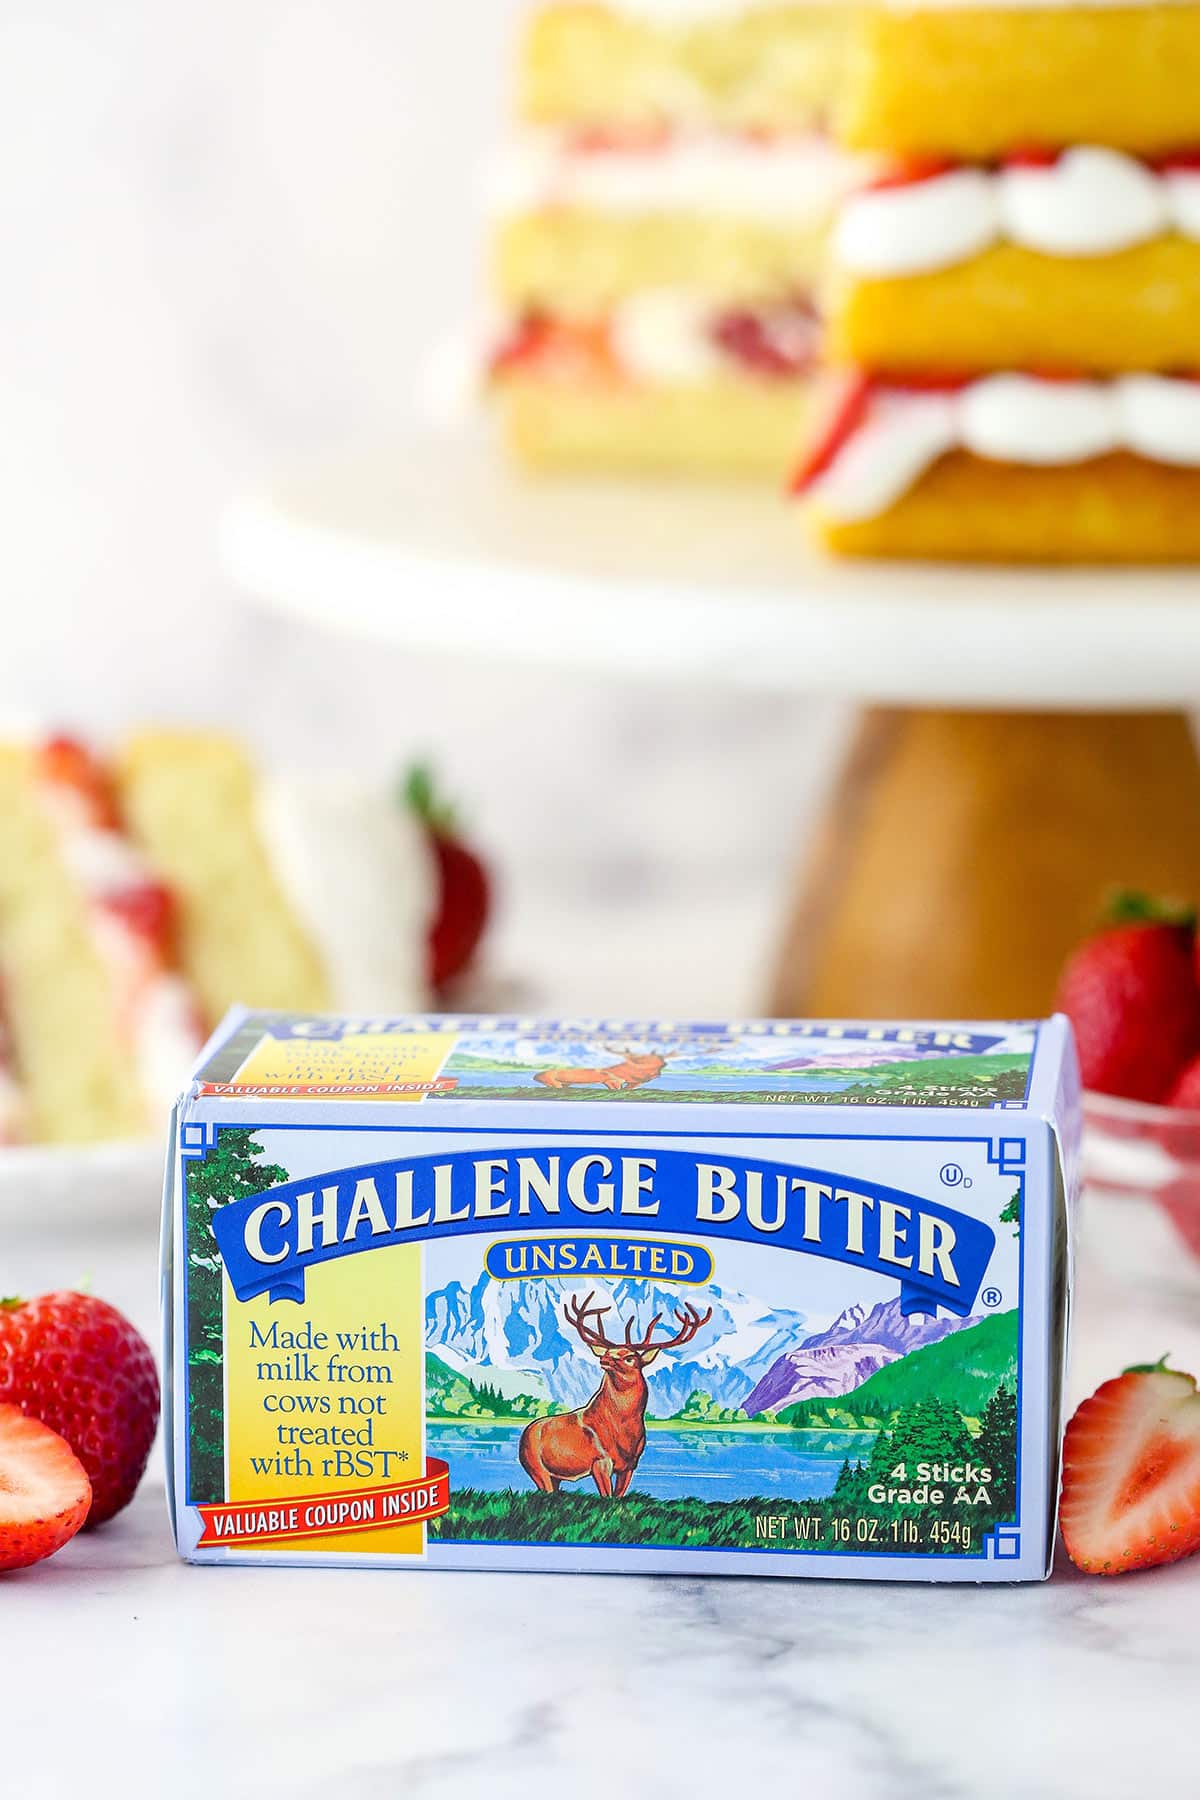 Challenge butter in front of strawberry shortcake cake near fresh strawberries.